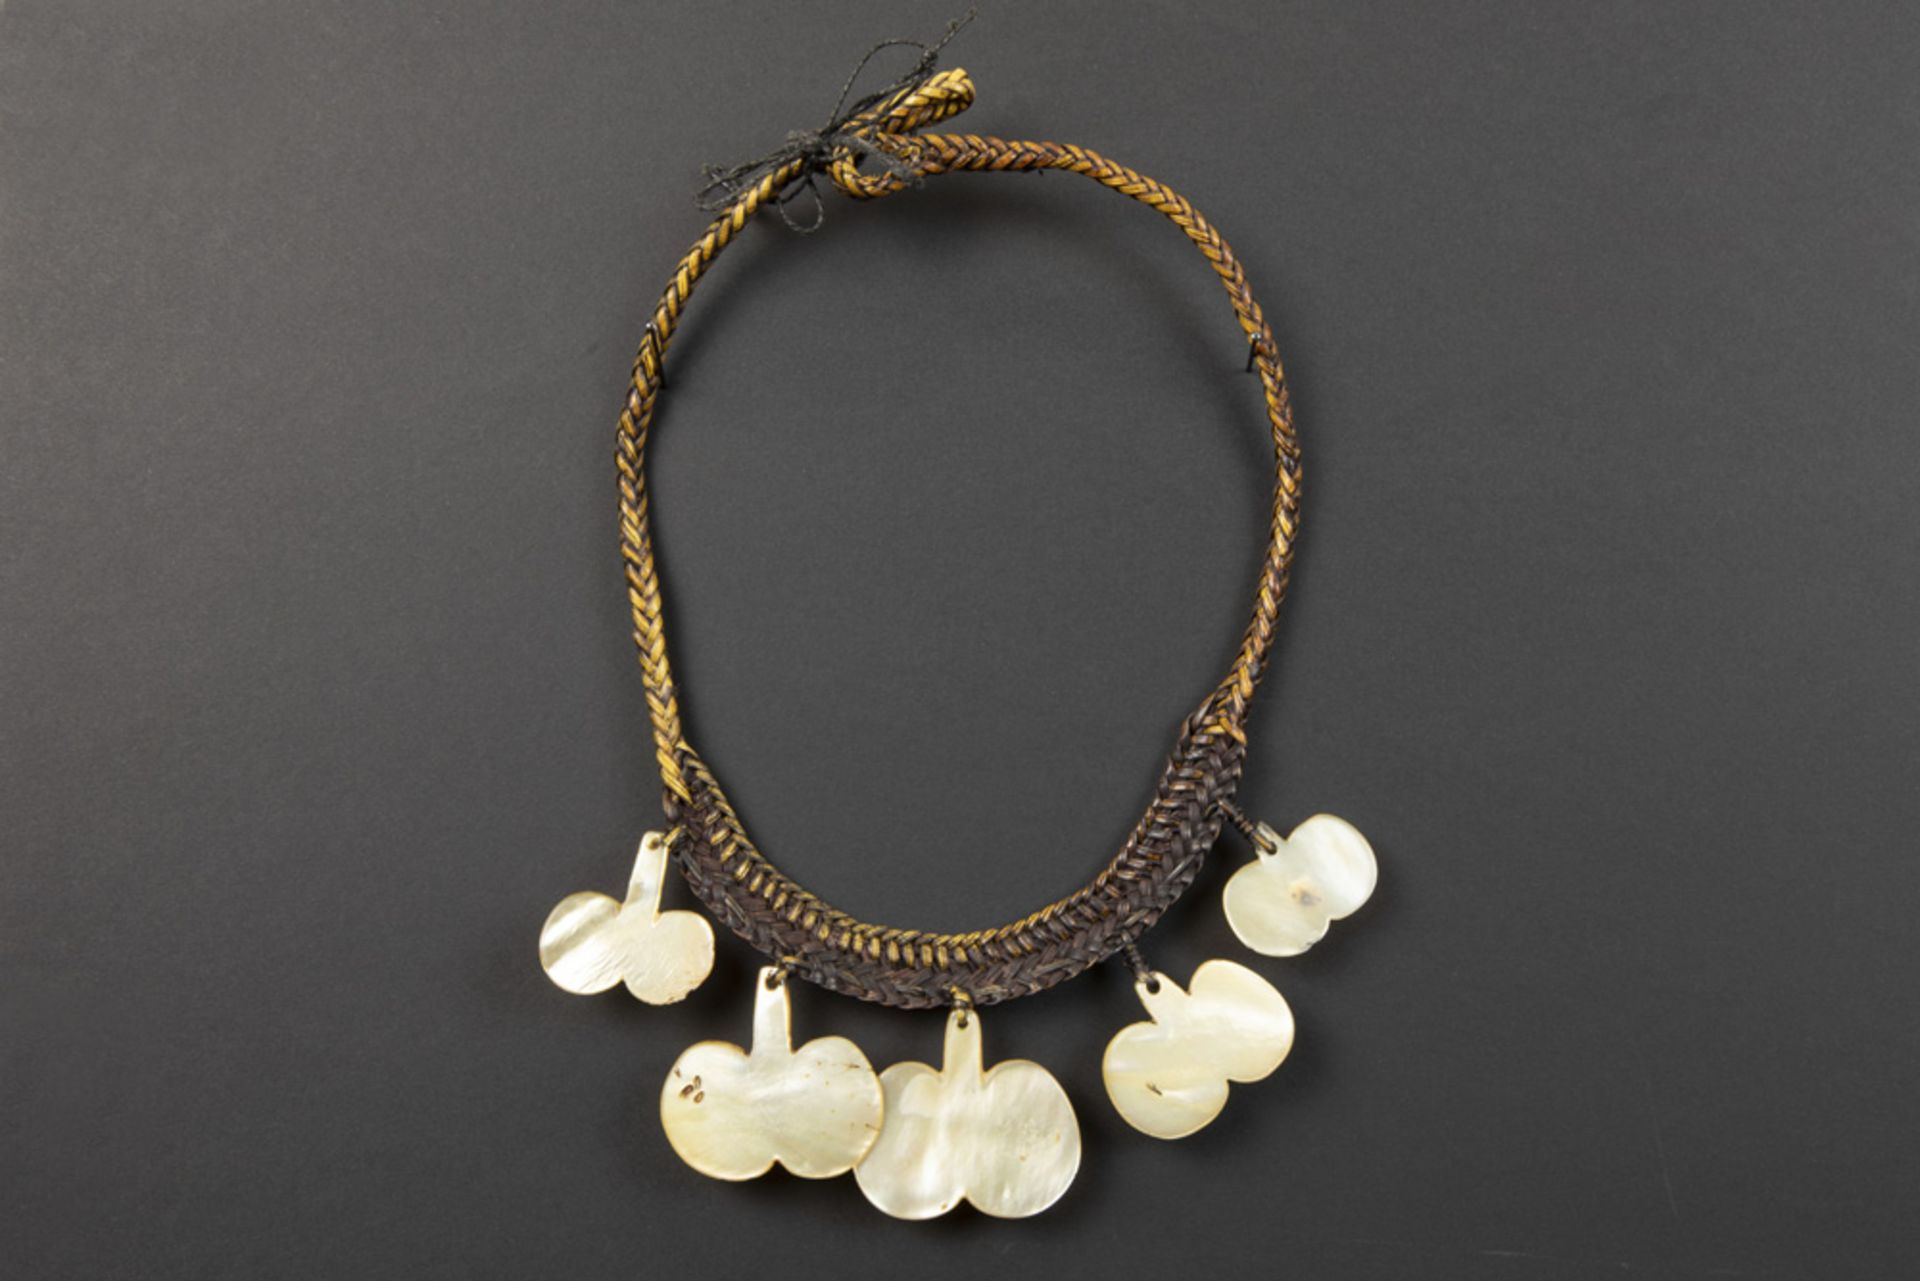 Philippines Ifugao necklace with five pendants in mother of pearl || FILIPIJNEN - ca 1950